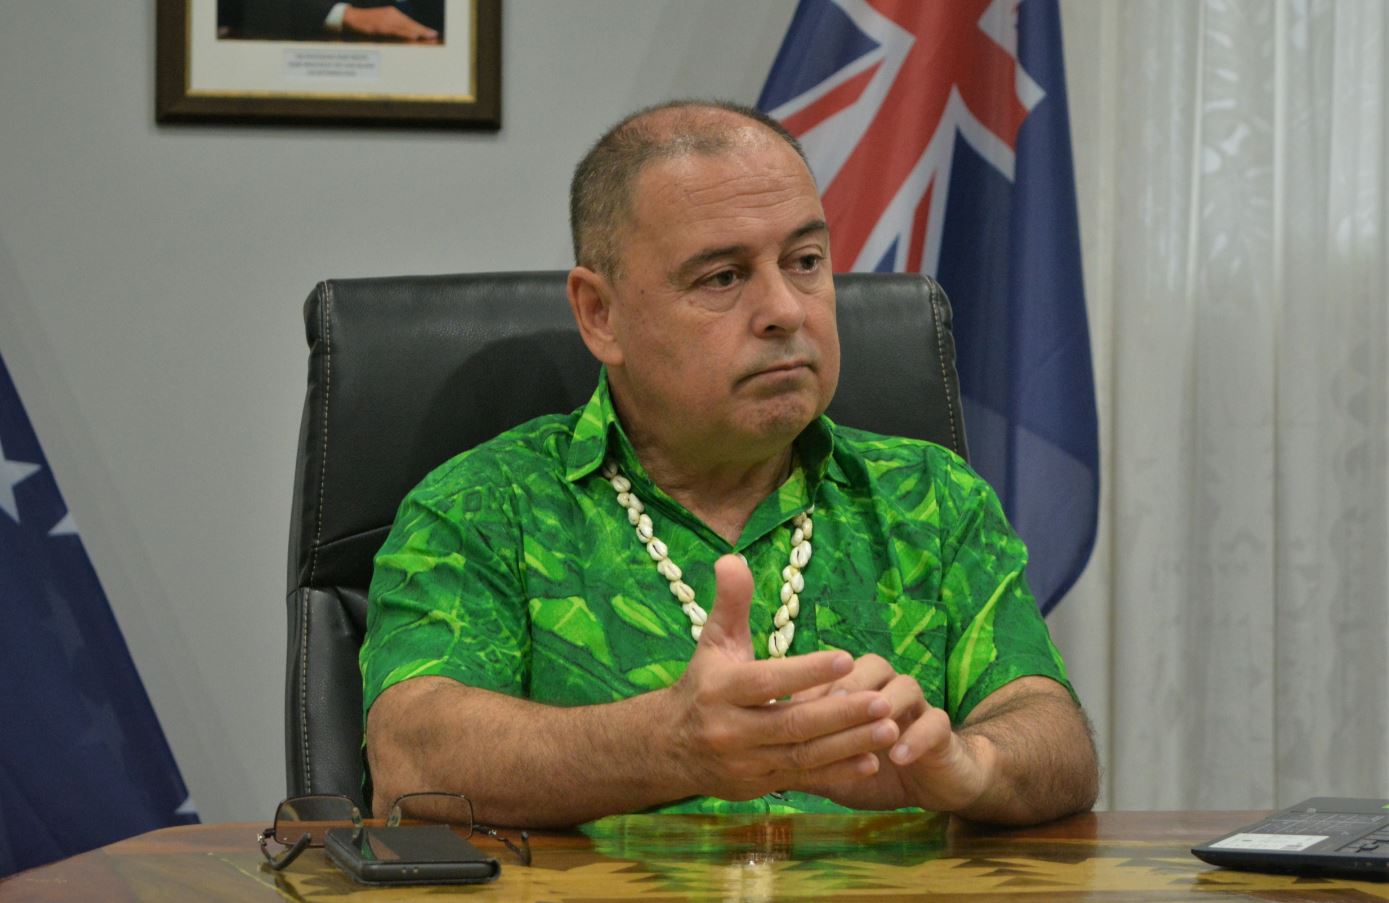 Cook Islands has eyes for Canada at G7 summit